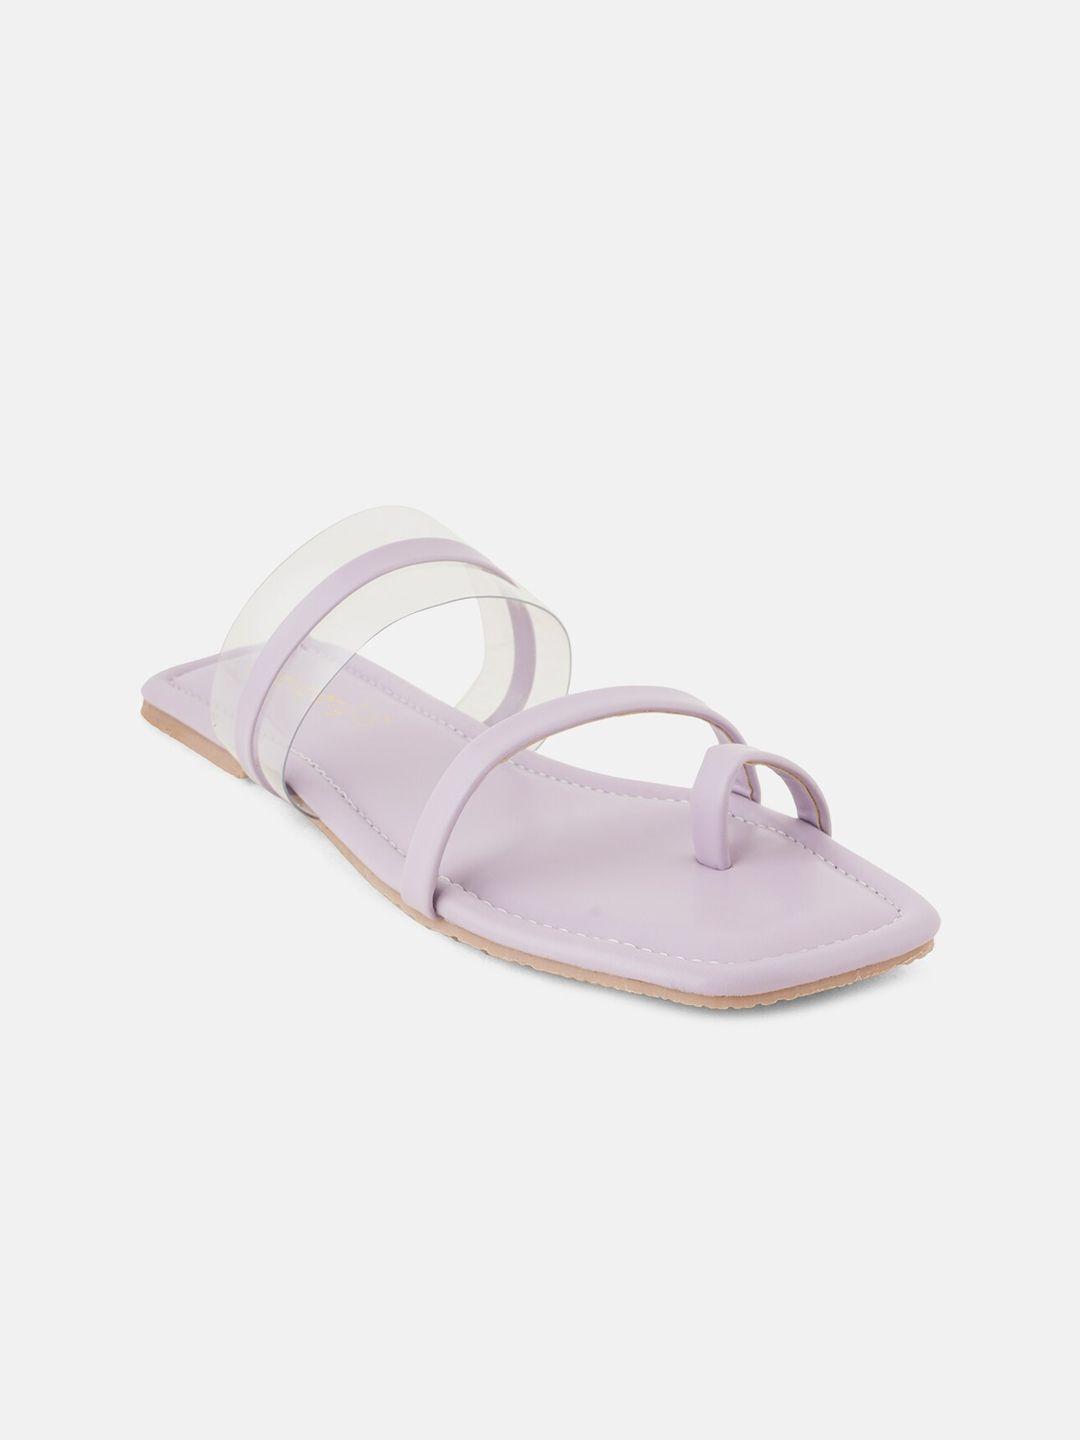 dressberry lavender two strap one toe flats